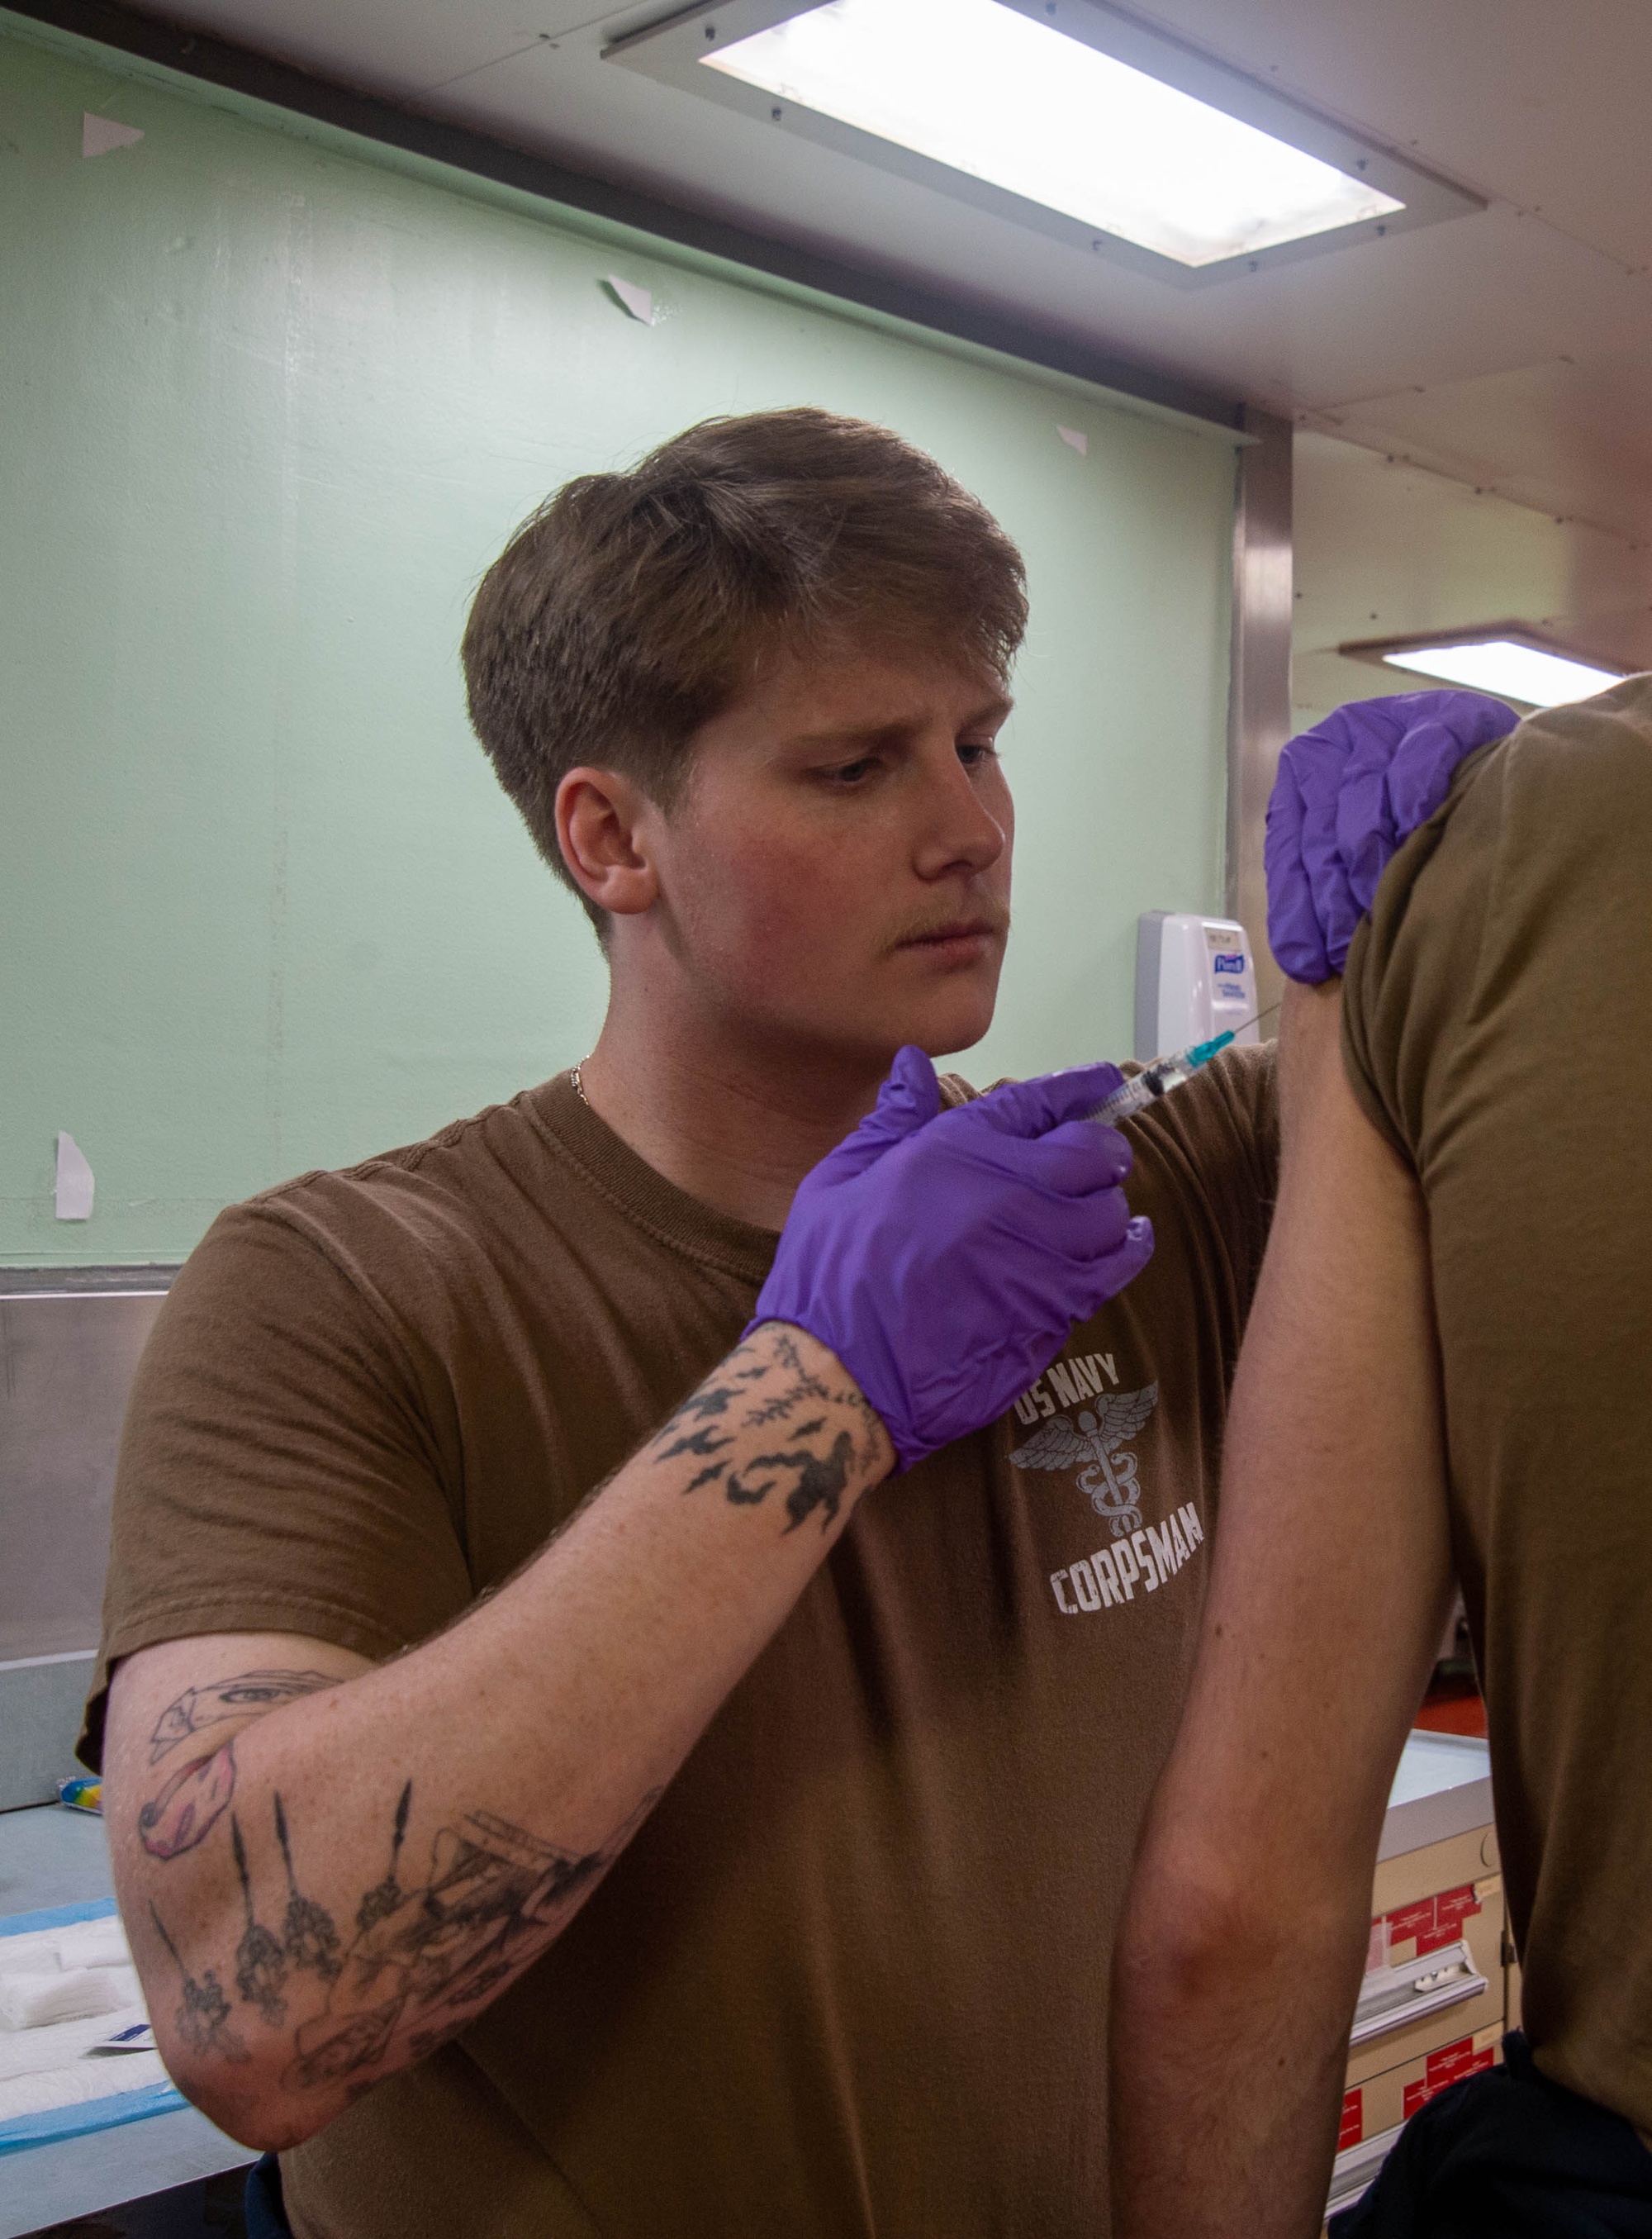 fmf corpsman tattoo | Discover